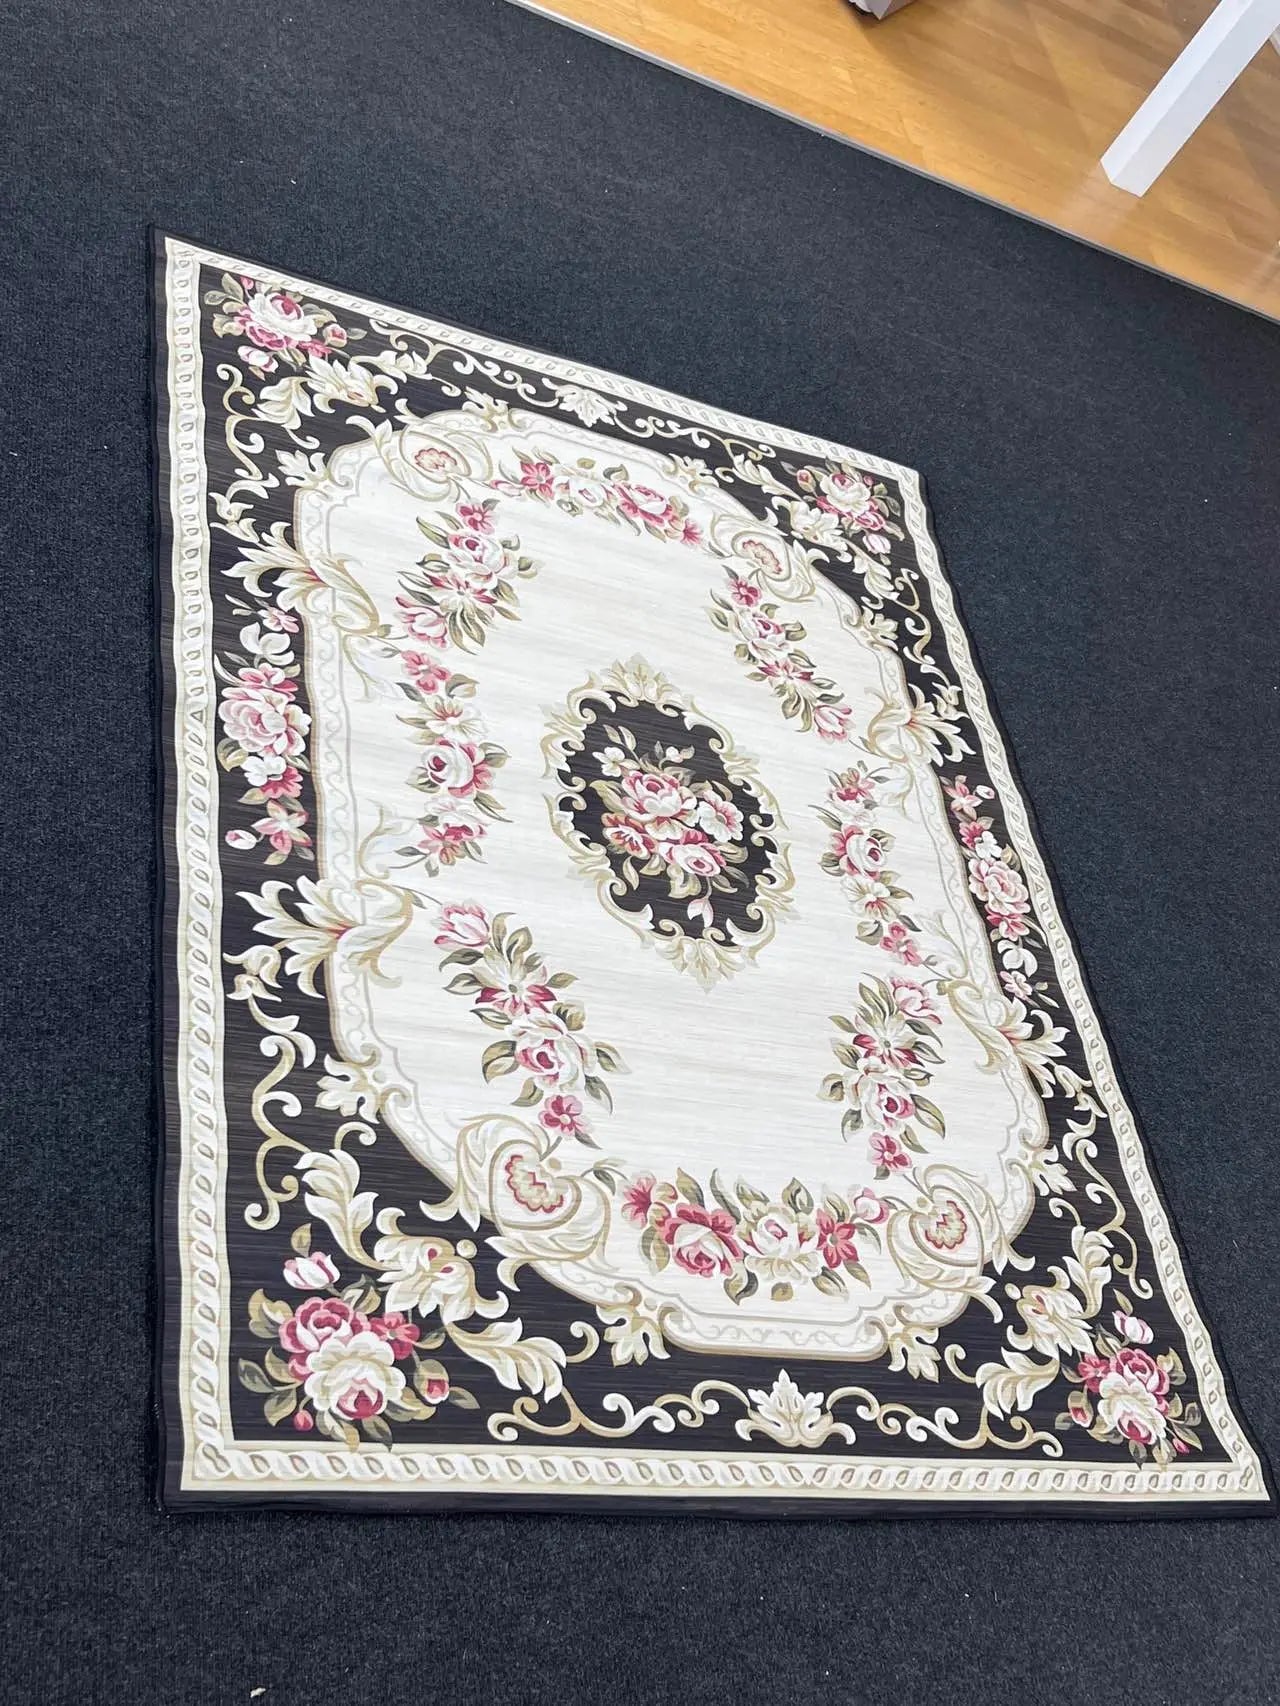 OS 71 Persian Style Rug The Carpet Maker